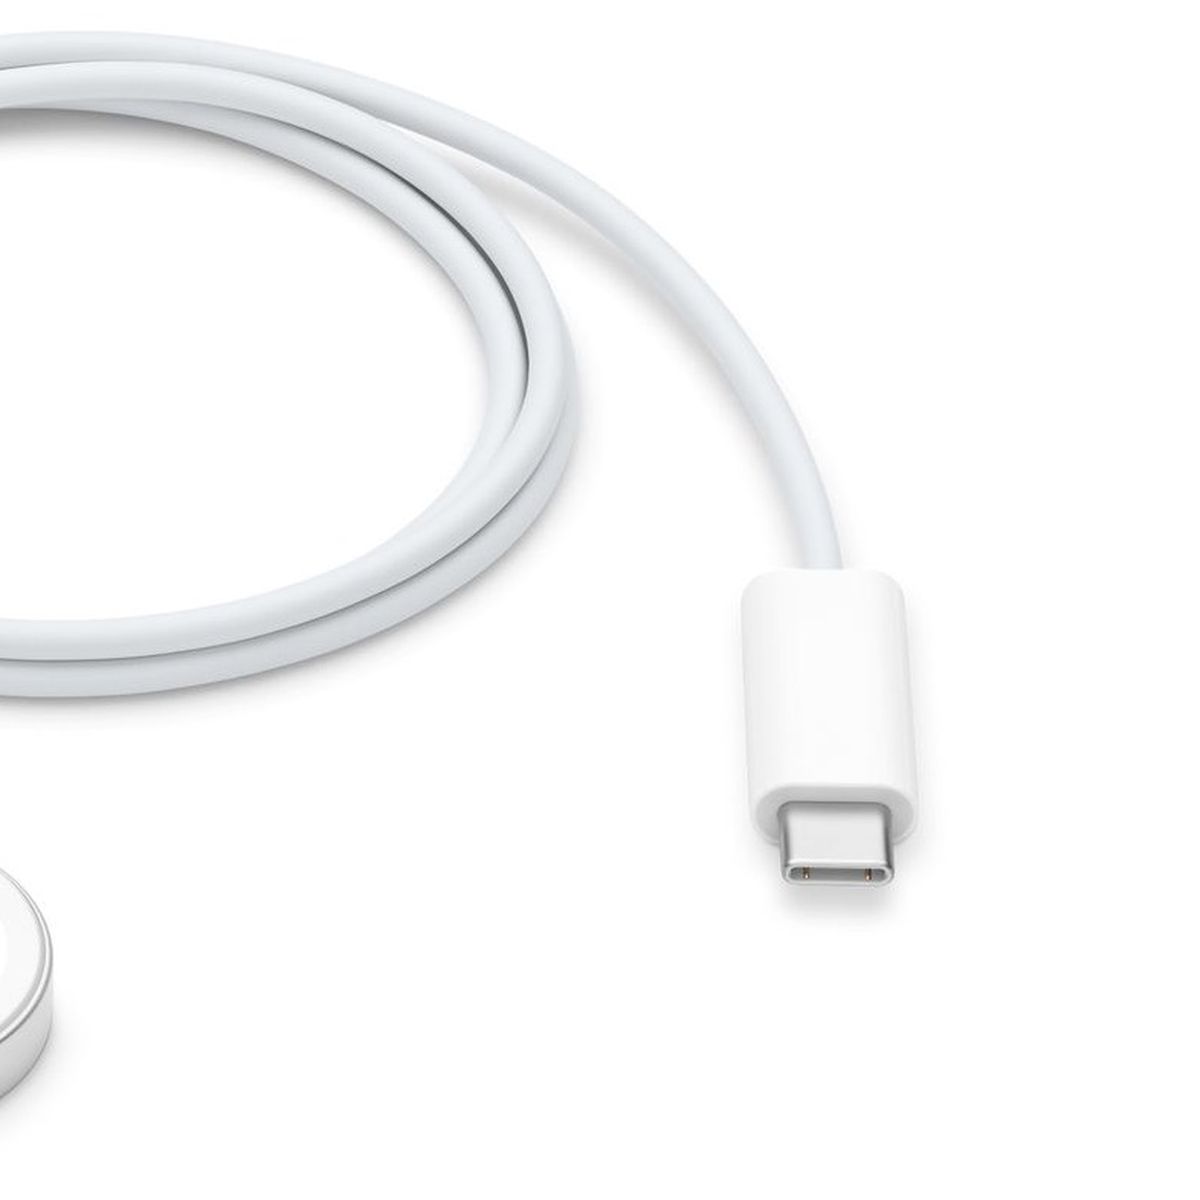 Apple Watch Series 7 Fast Charging Requires 5W or Greater USB-C PD Adapter  - MacRumors